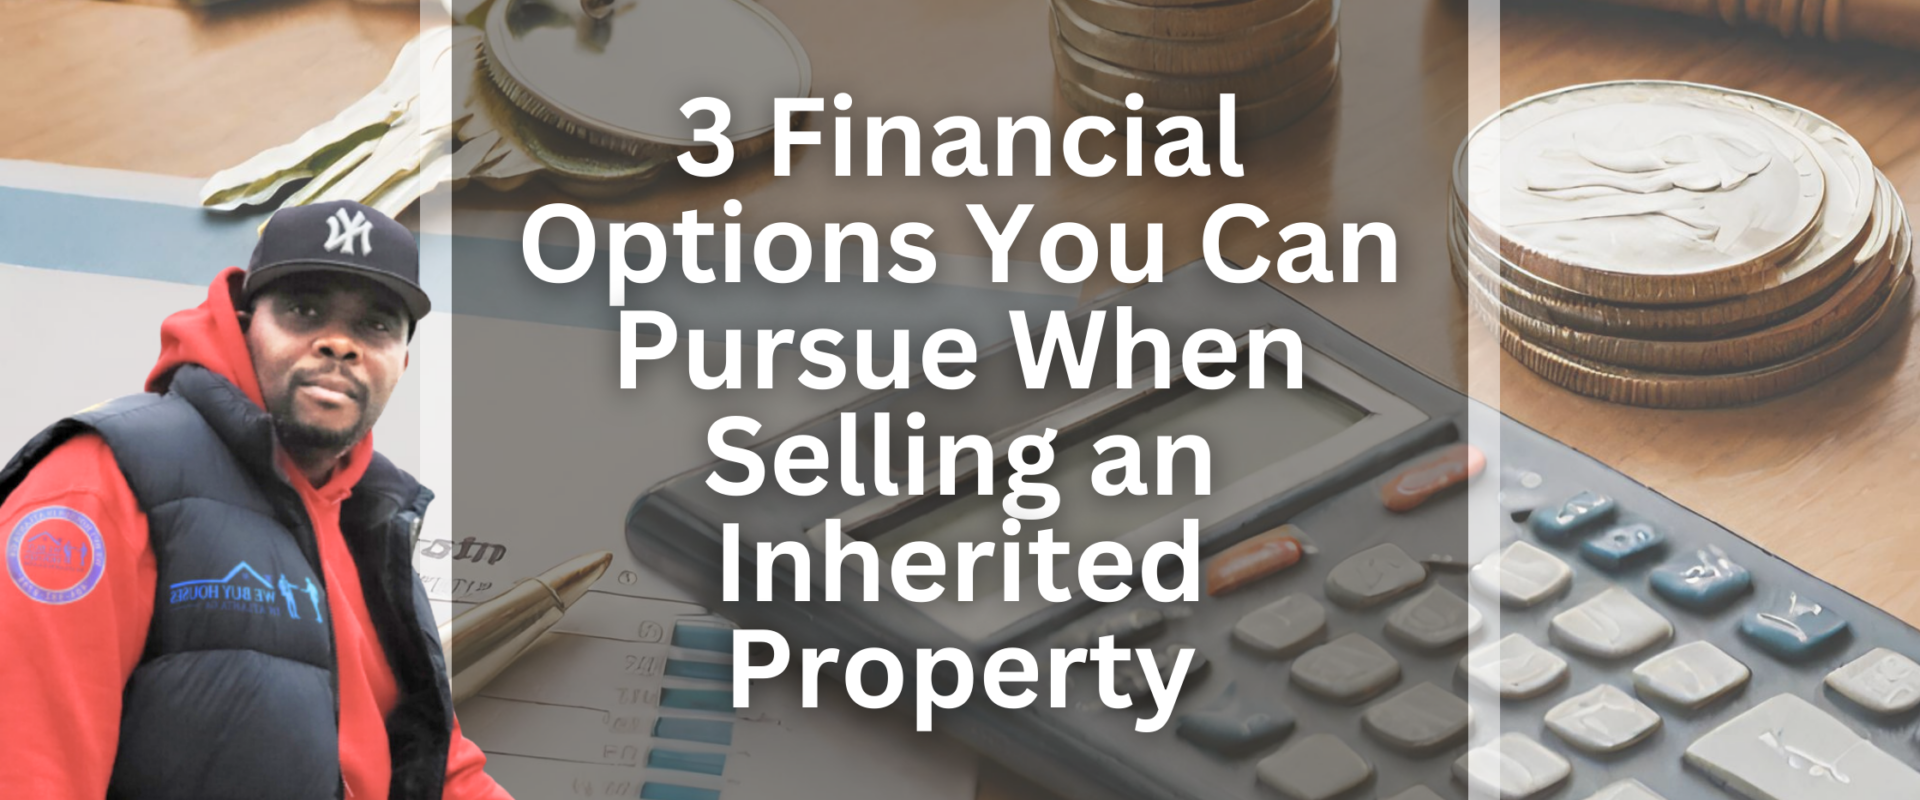 3-Financial-Options-You-Can-Pursue-When-Selling-an-Inherited-Property